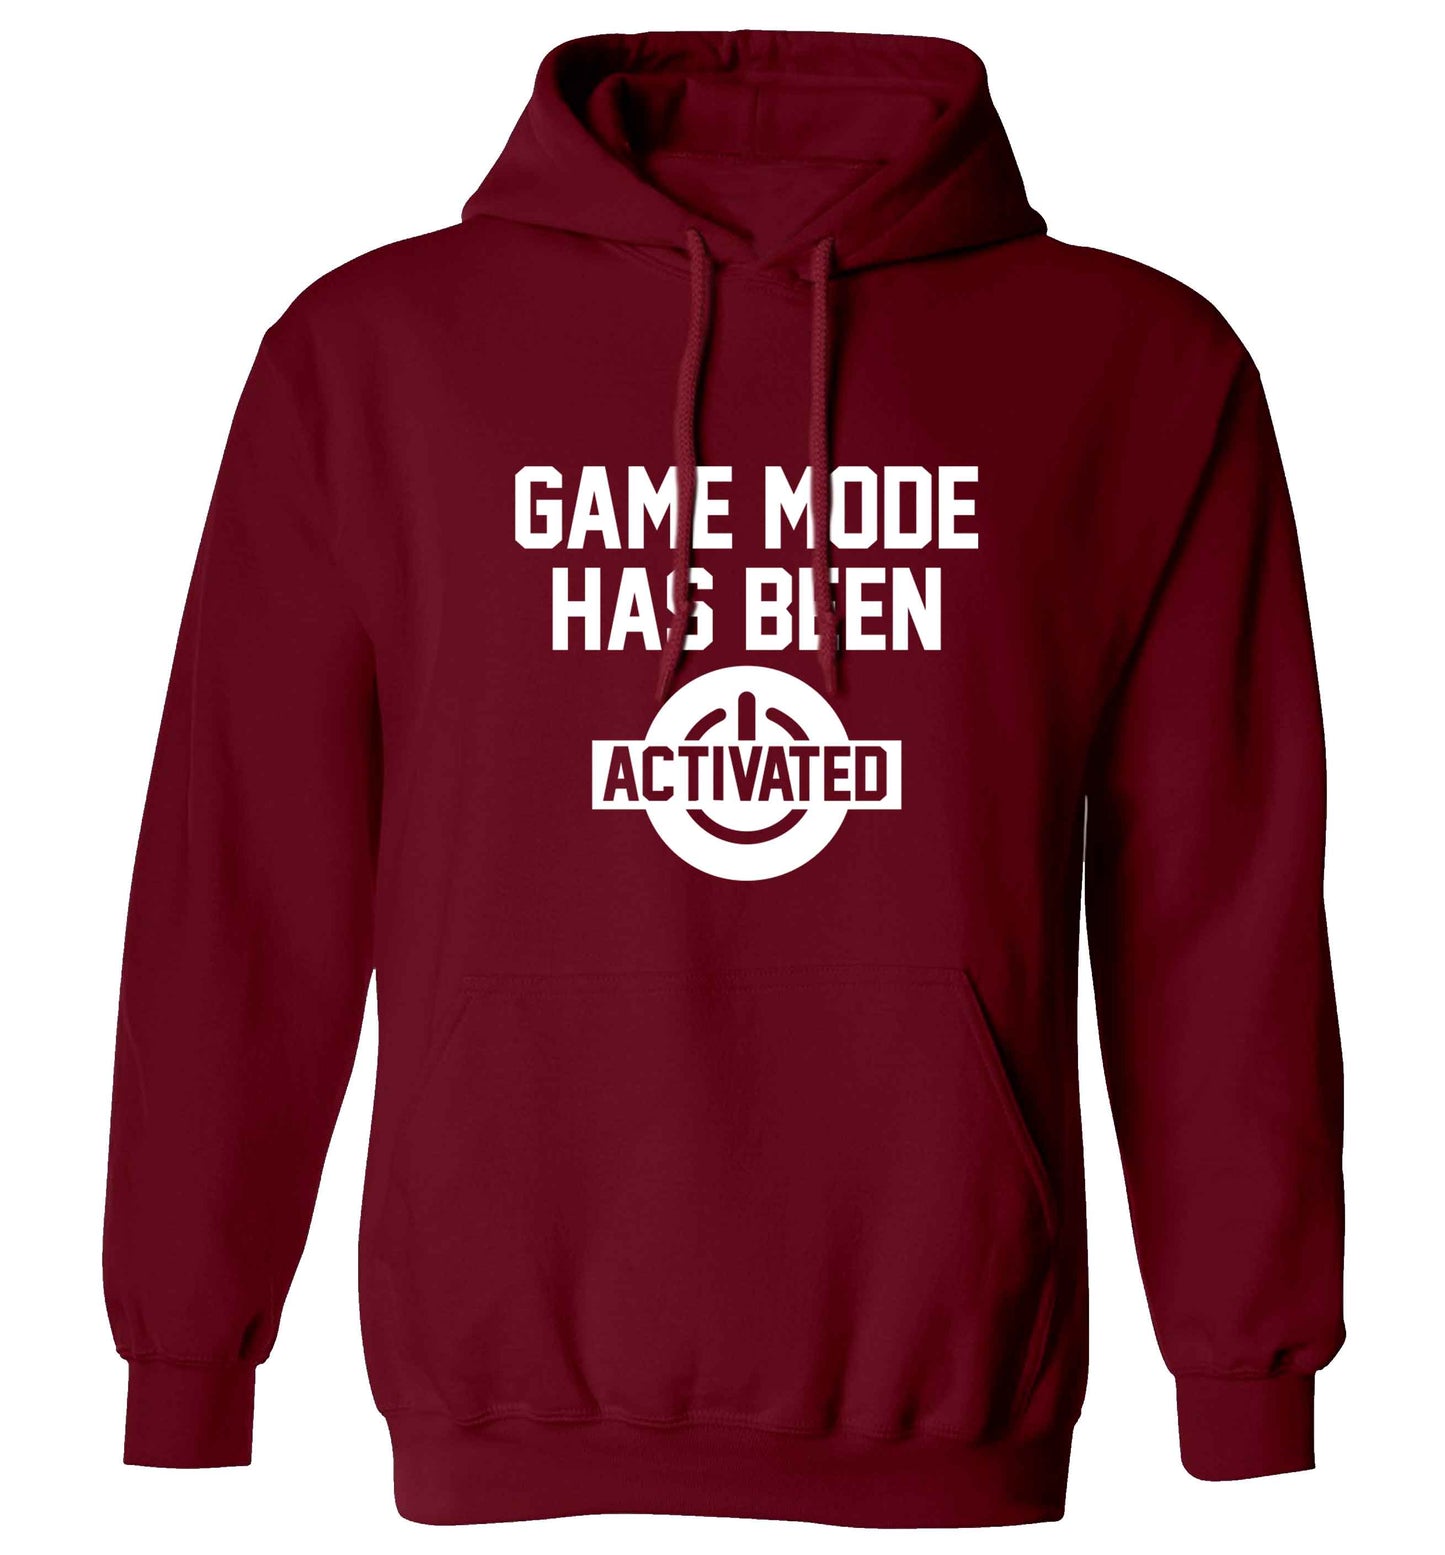 Game mode has been activated adults unisex maroon hoodie 2XL